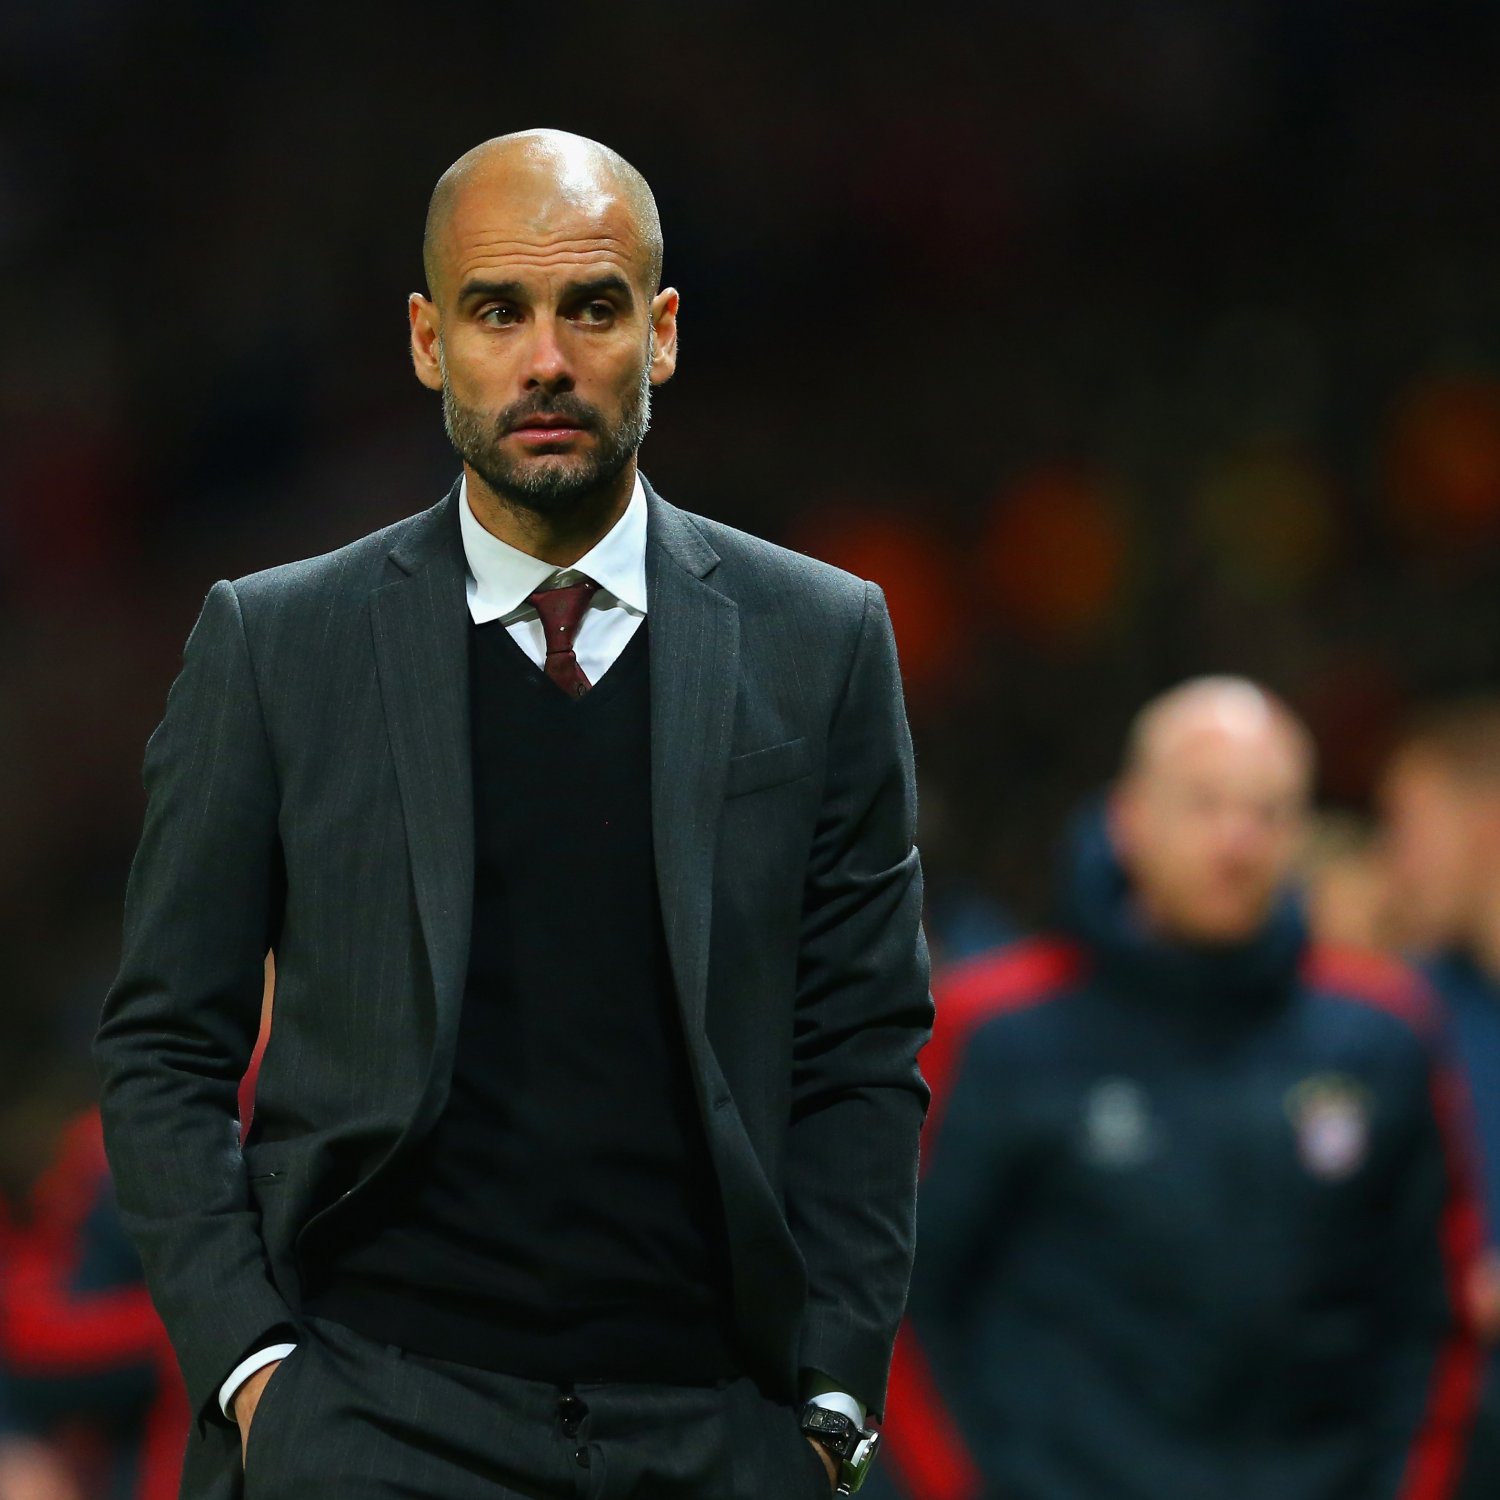 Pep Guardiola Reportedly Considering Qatar Job Offer for 2022 World Cup